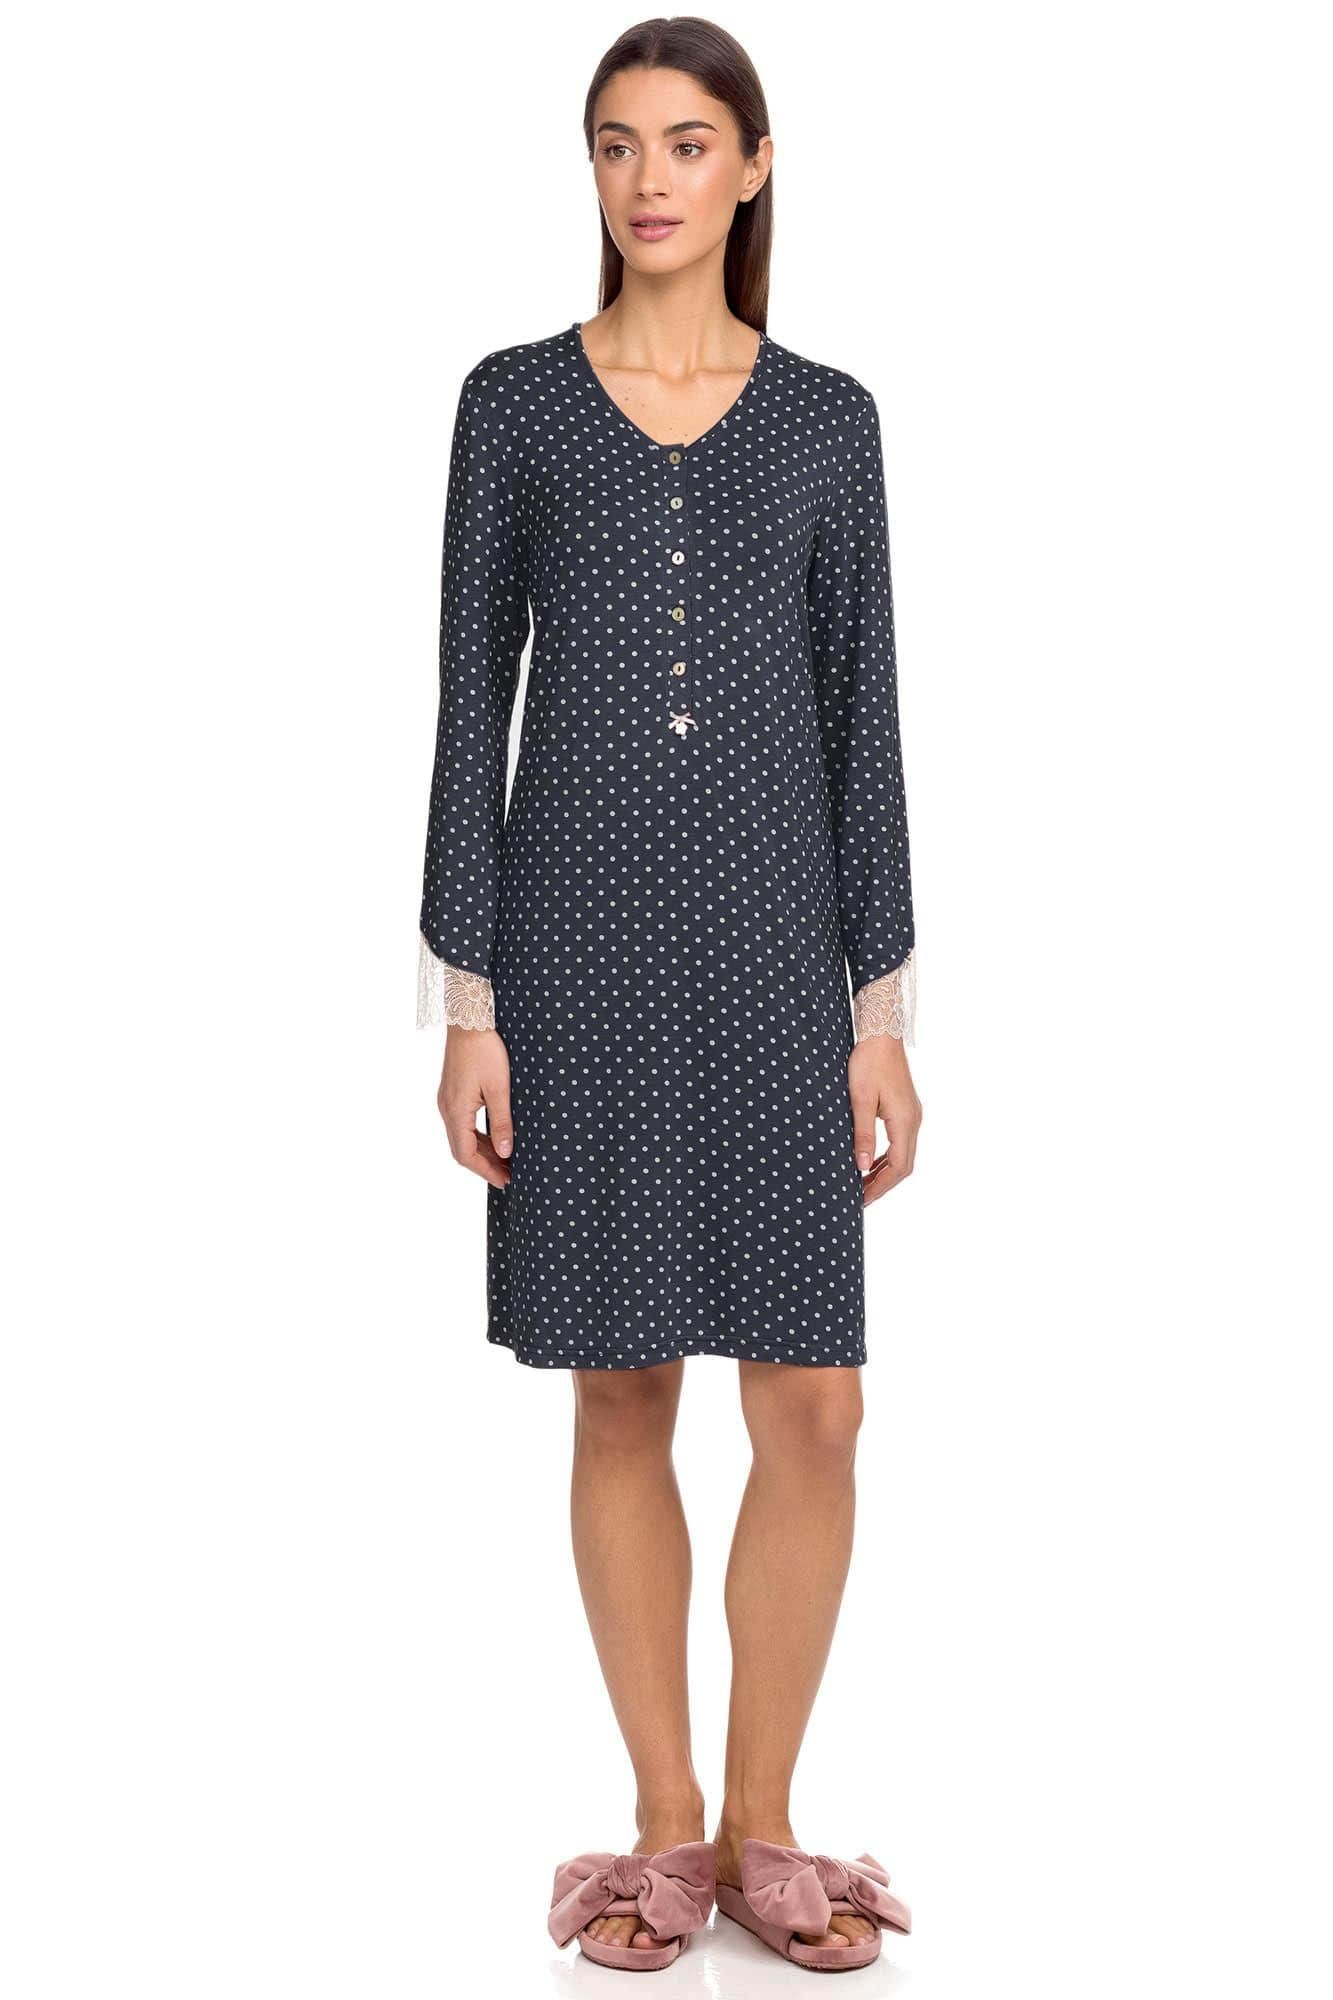 Nightgown with polka dots